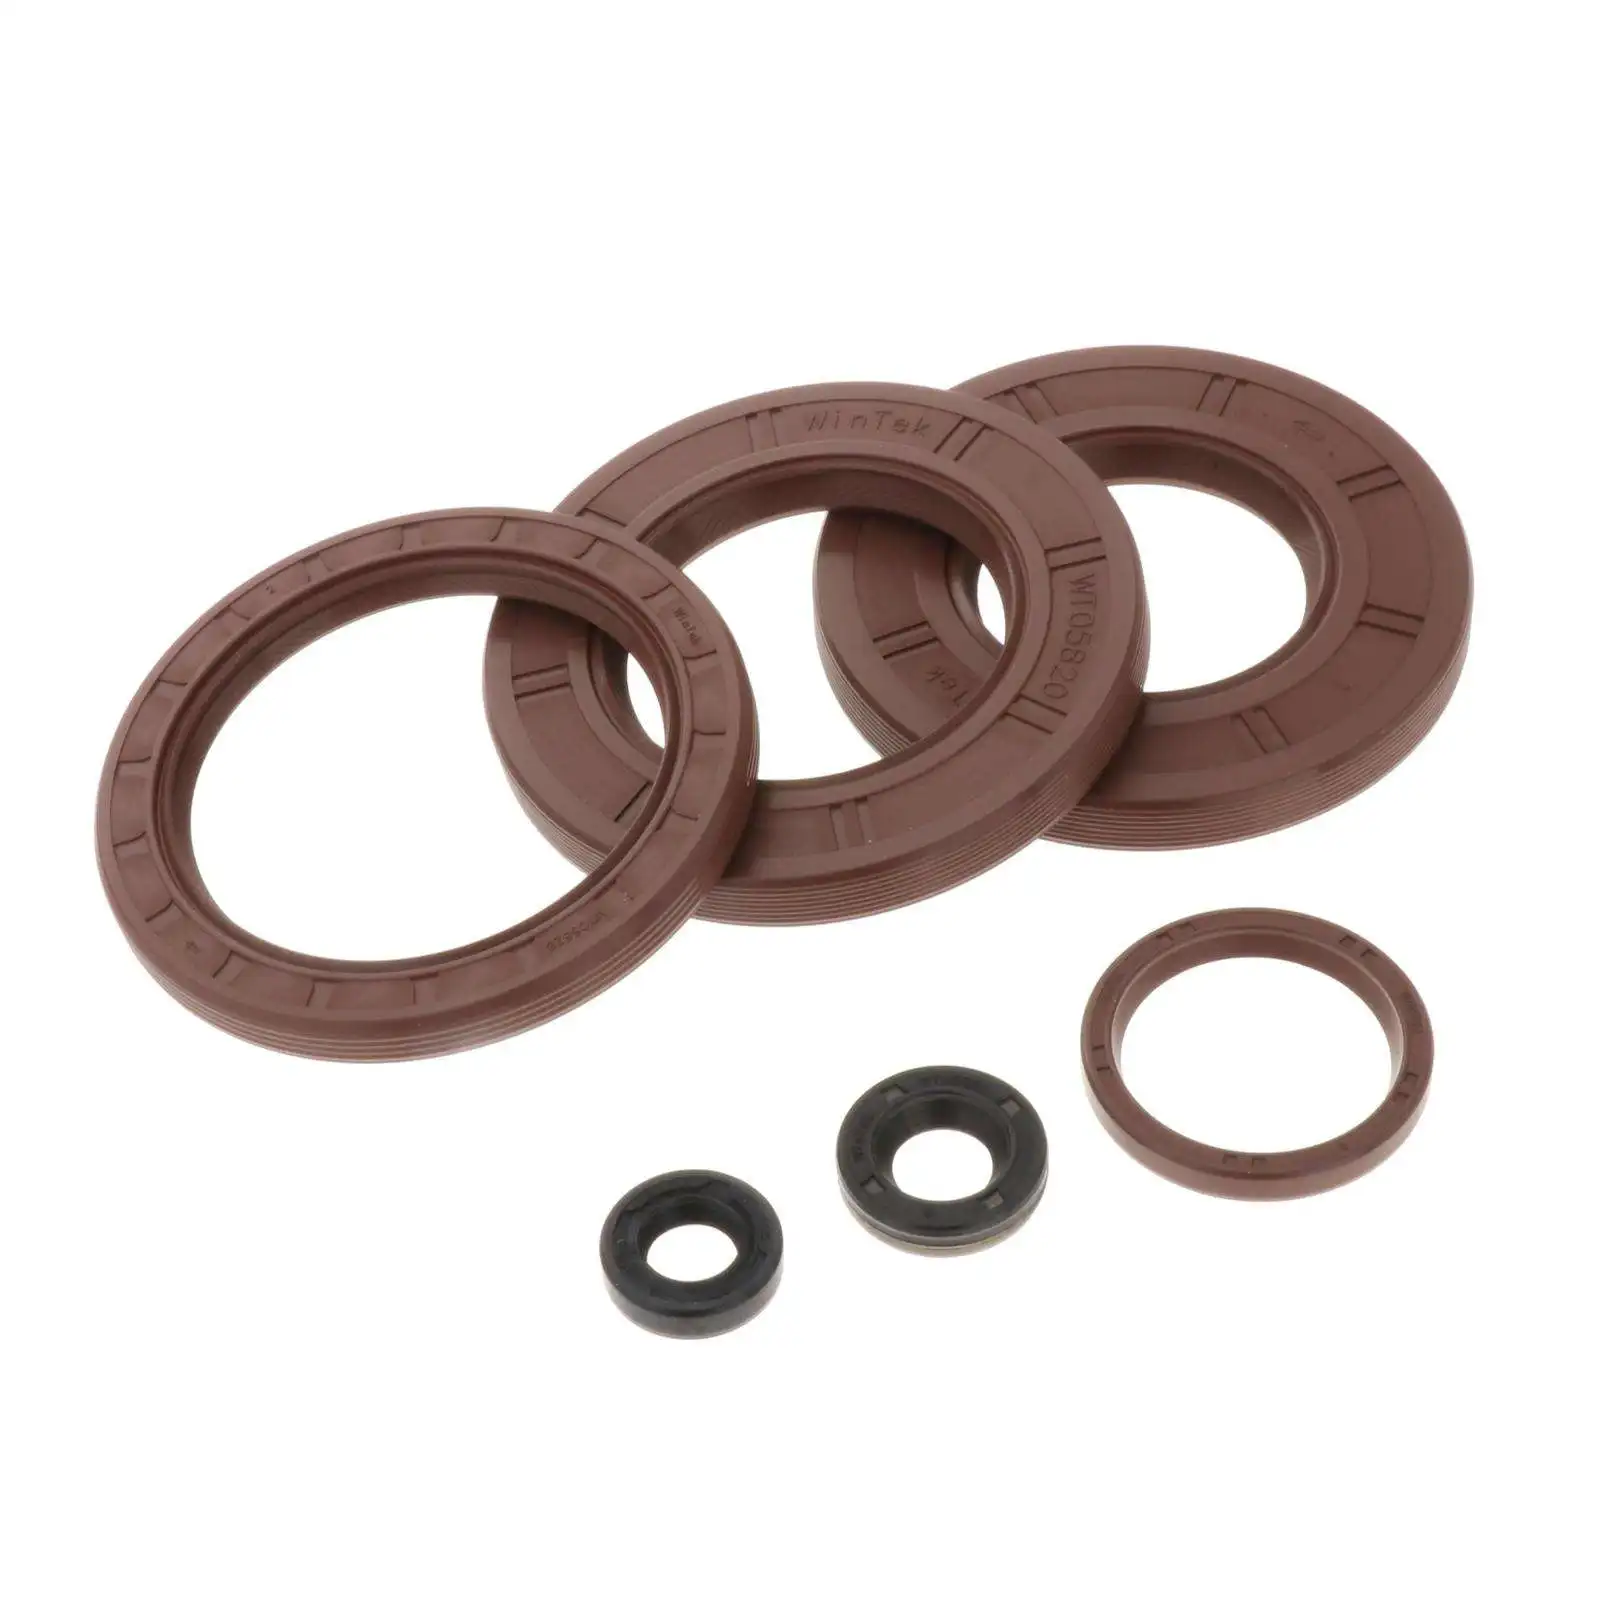 8HP45 - Transmission Oil Seal Package Oil Seal Set ZF8Speed for  X1 X3 X5 8HP45 319080AK for Land Rover Auto Parts